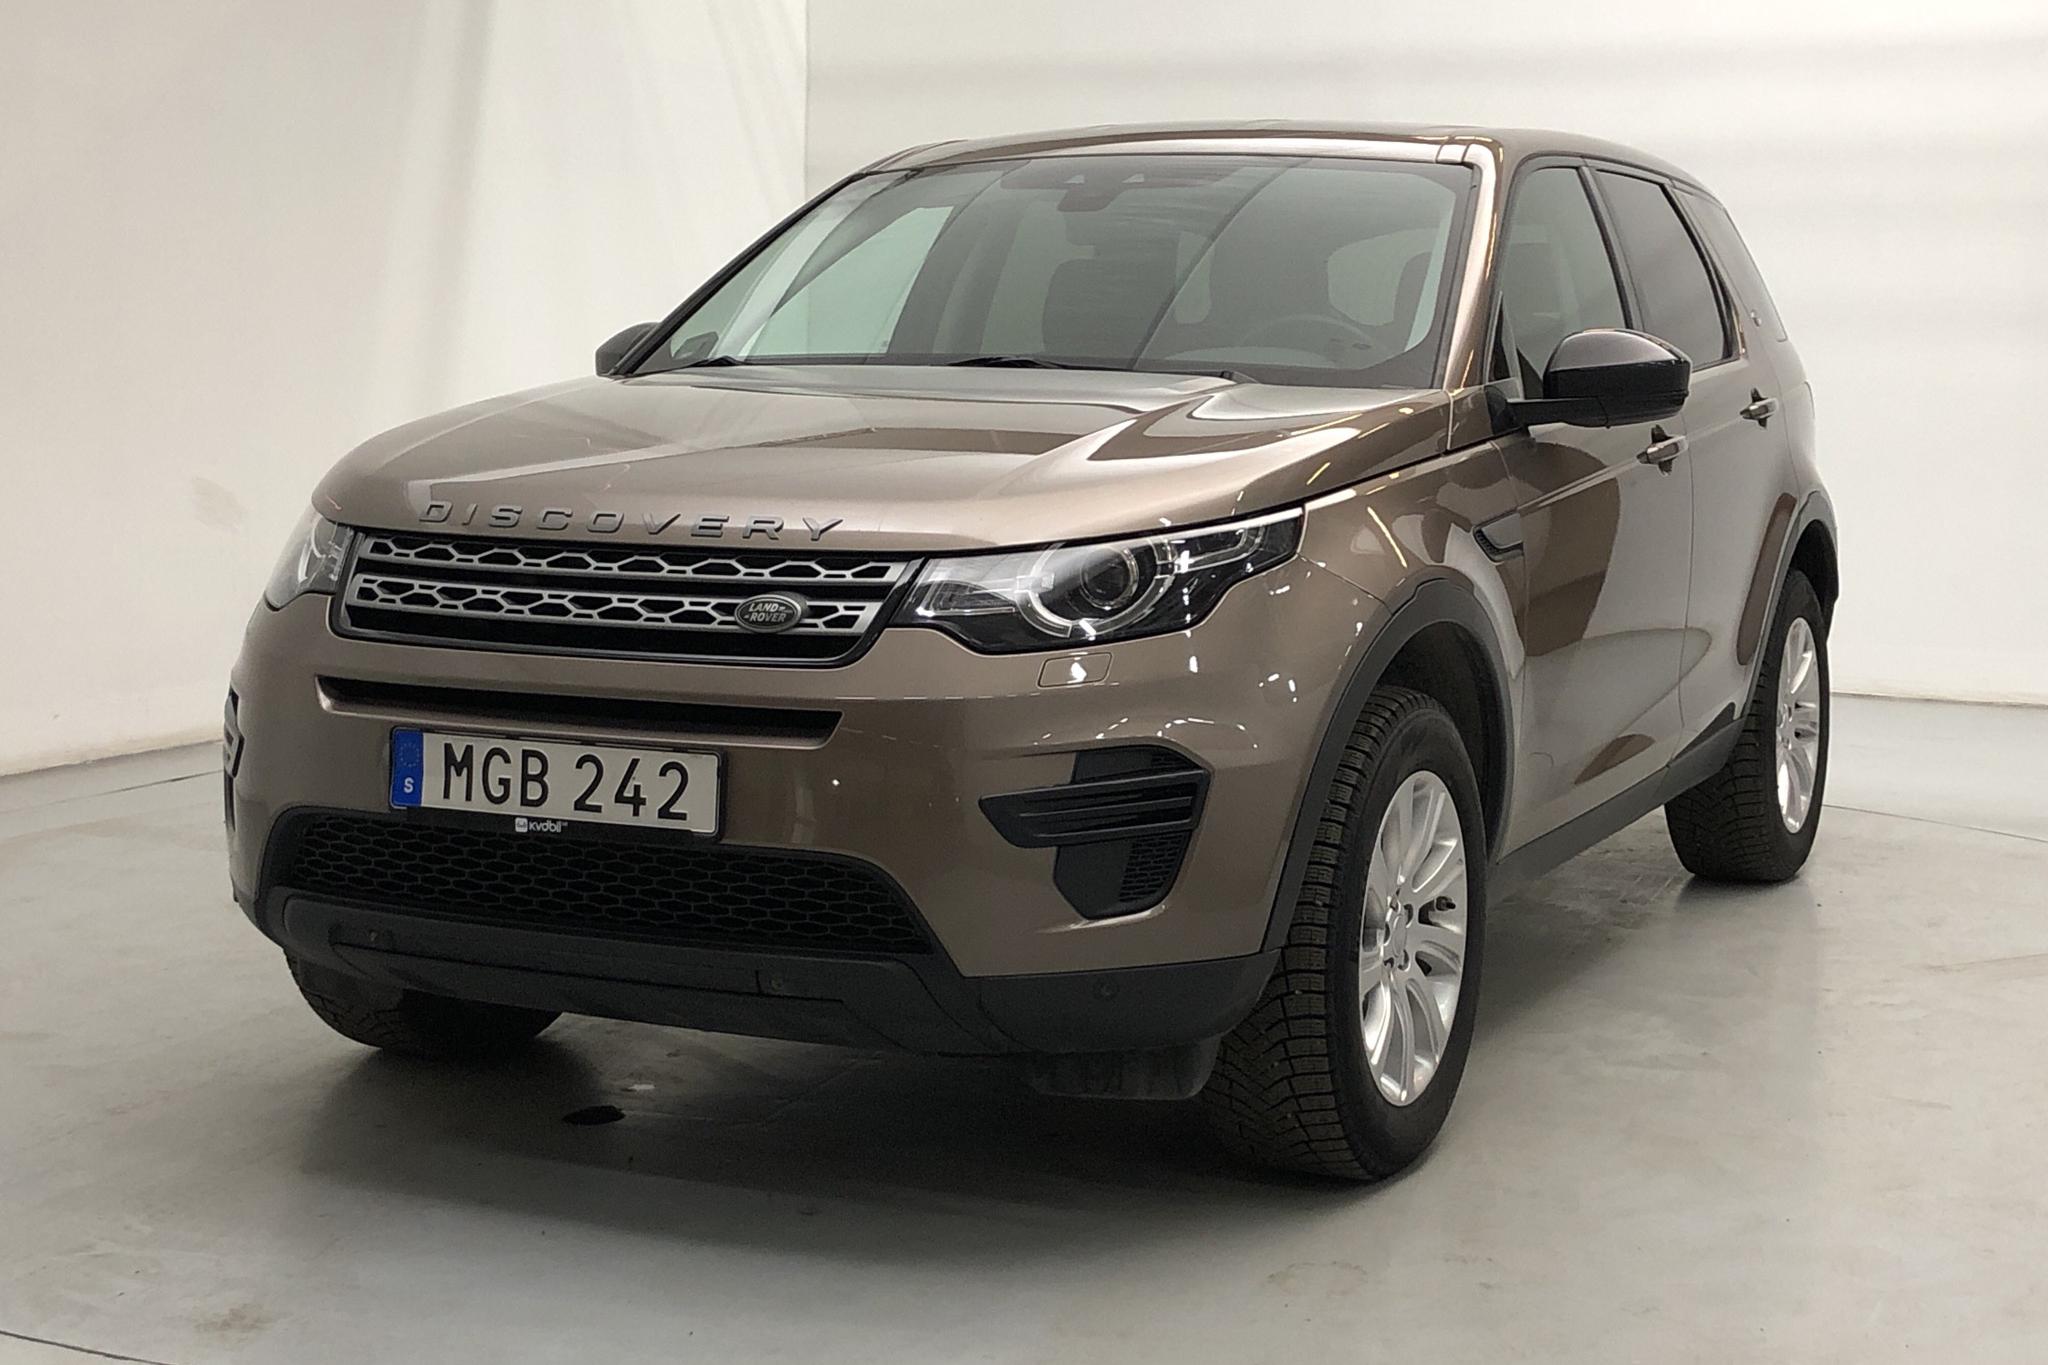 Land Rover Discovery Sport 2.0 TD4 AWD (180hk) - 109 740 km - Automatic - gray - 2016